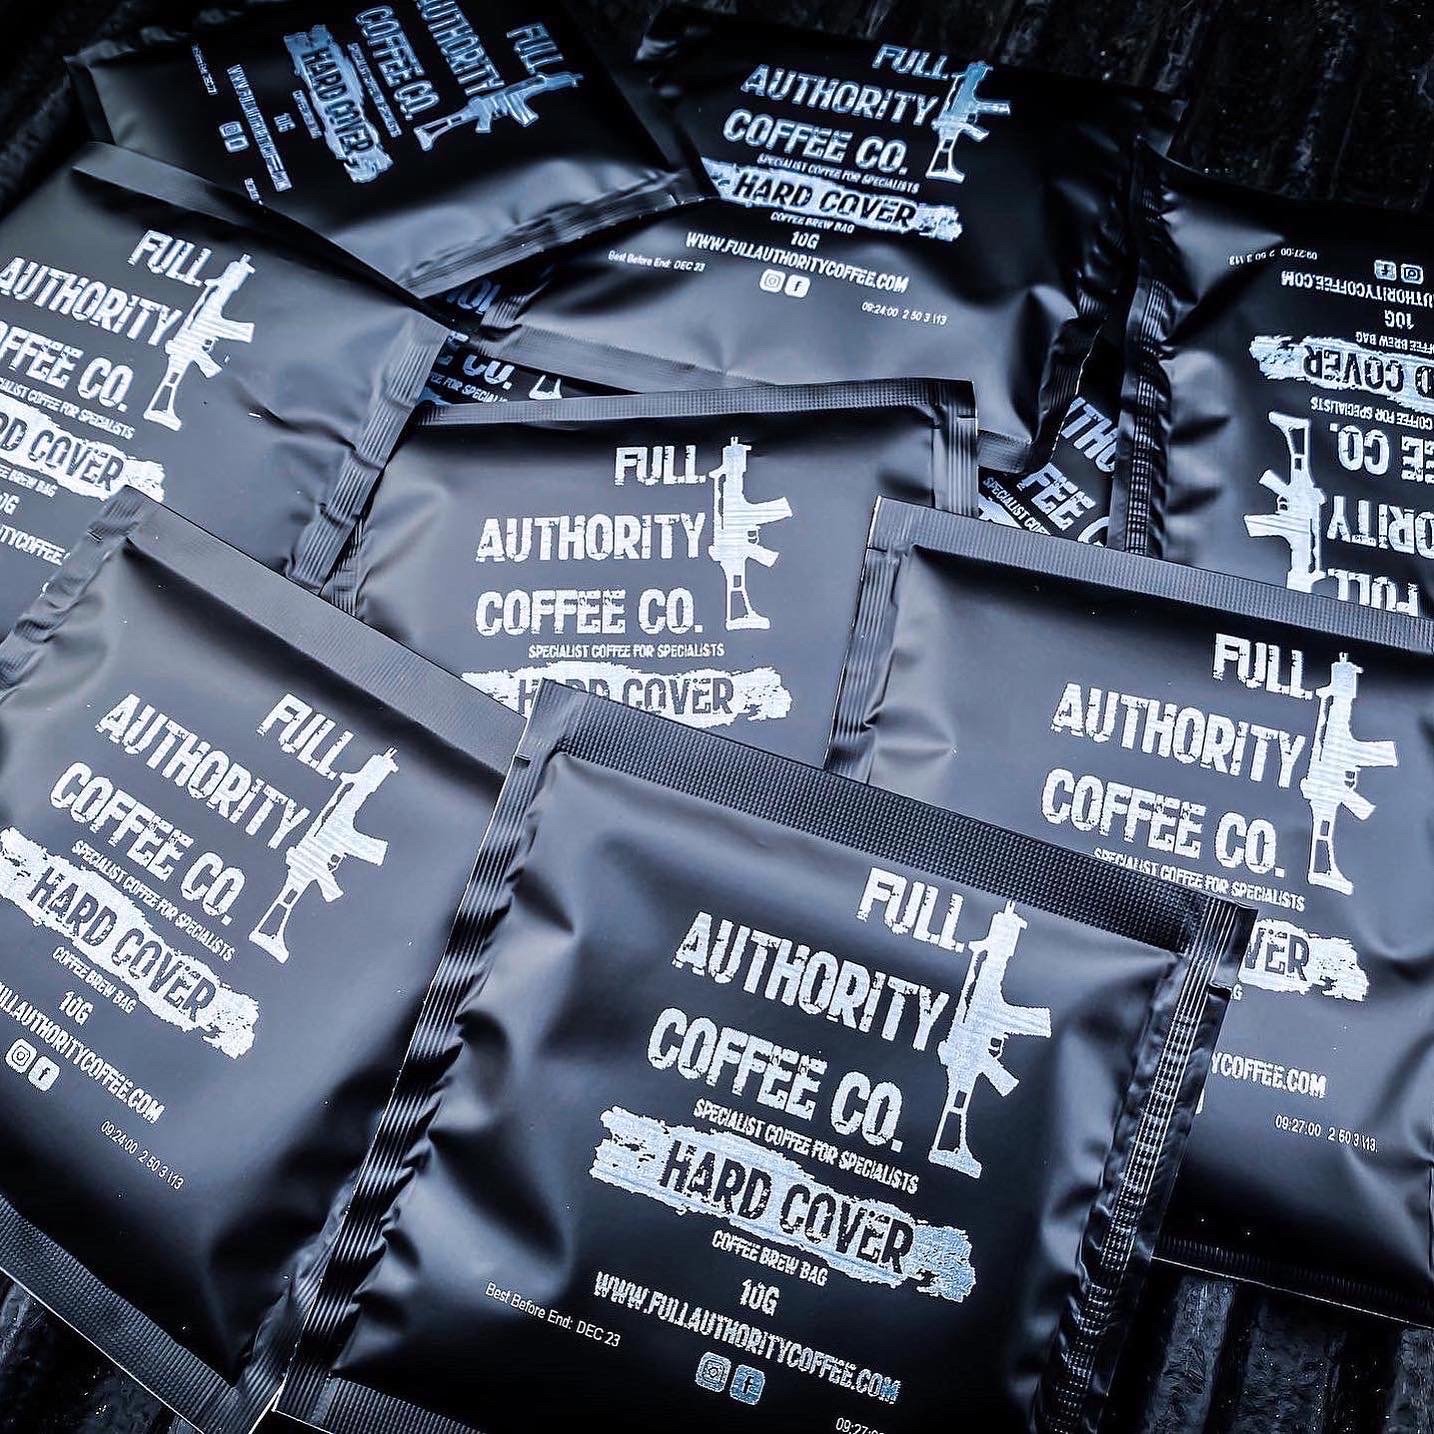 Image of “HARD COVER” COFFEE BREW BAGS - FULL AUTHORITY COFFEE Co. 